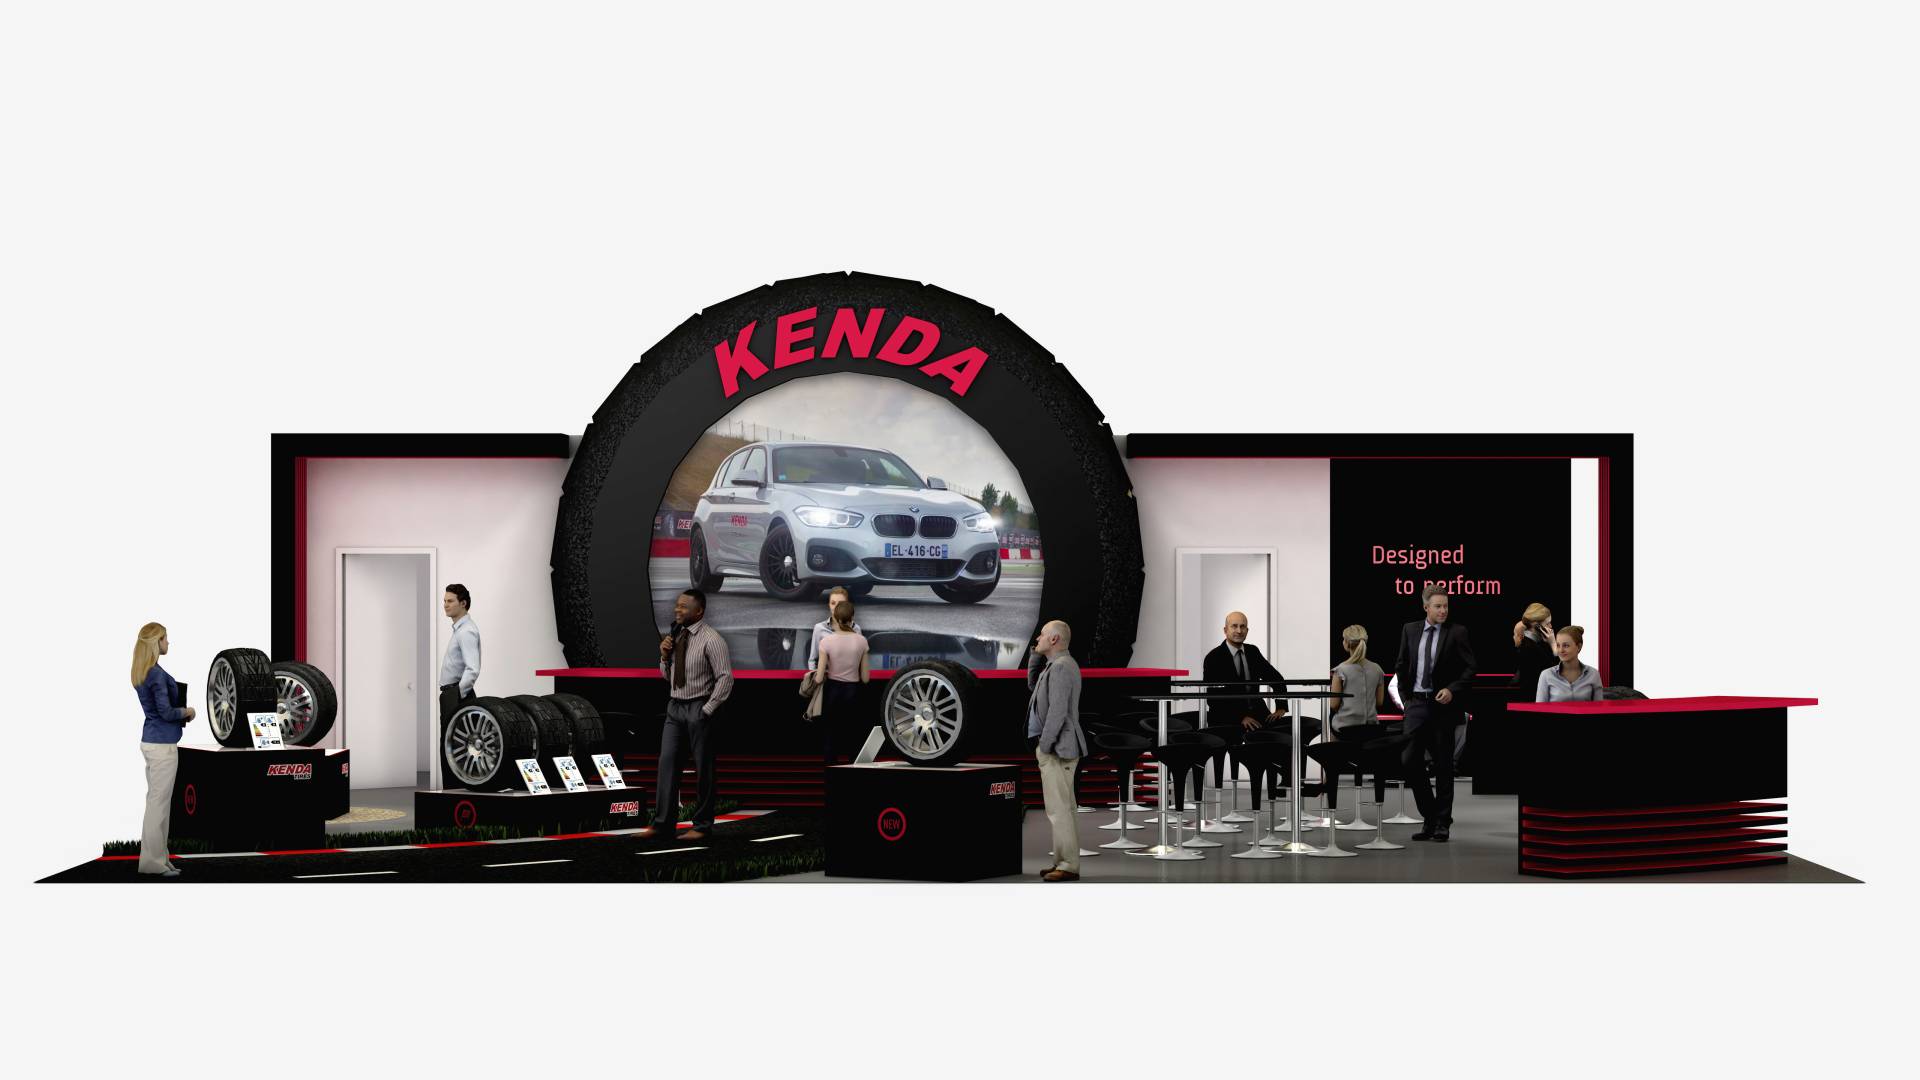 Design of the KENDA stand from the front